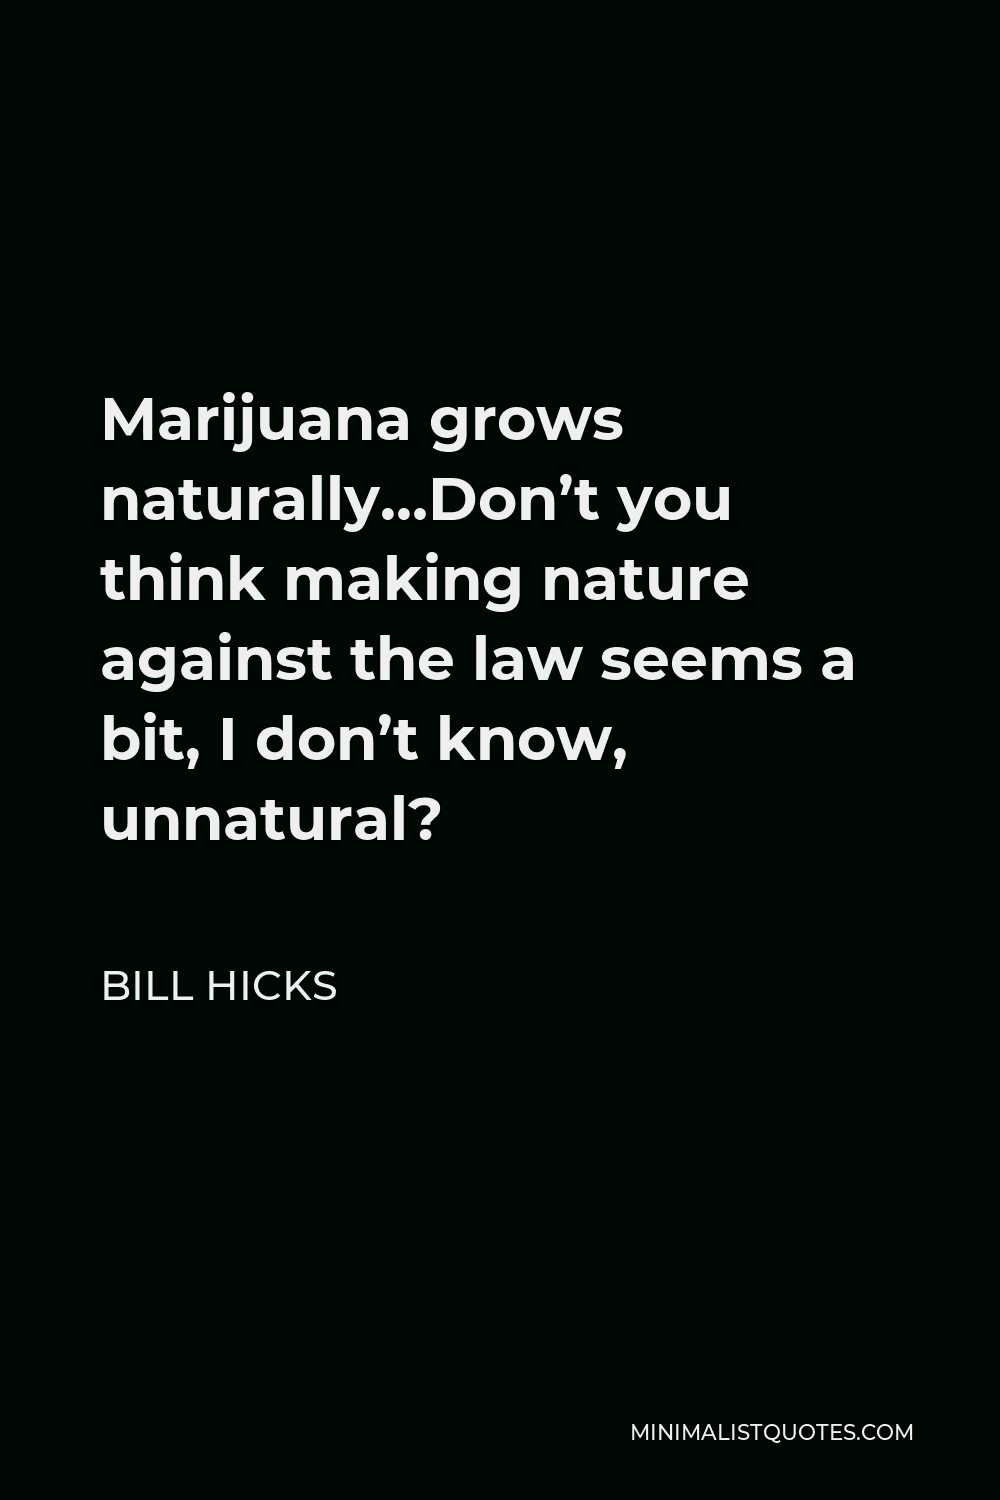 Bill Hicks Quote - Marijuana grows naturally…Don’t you think making nature against the law seems a bit, I don’t know, unnatural?